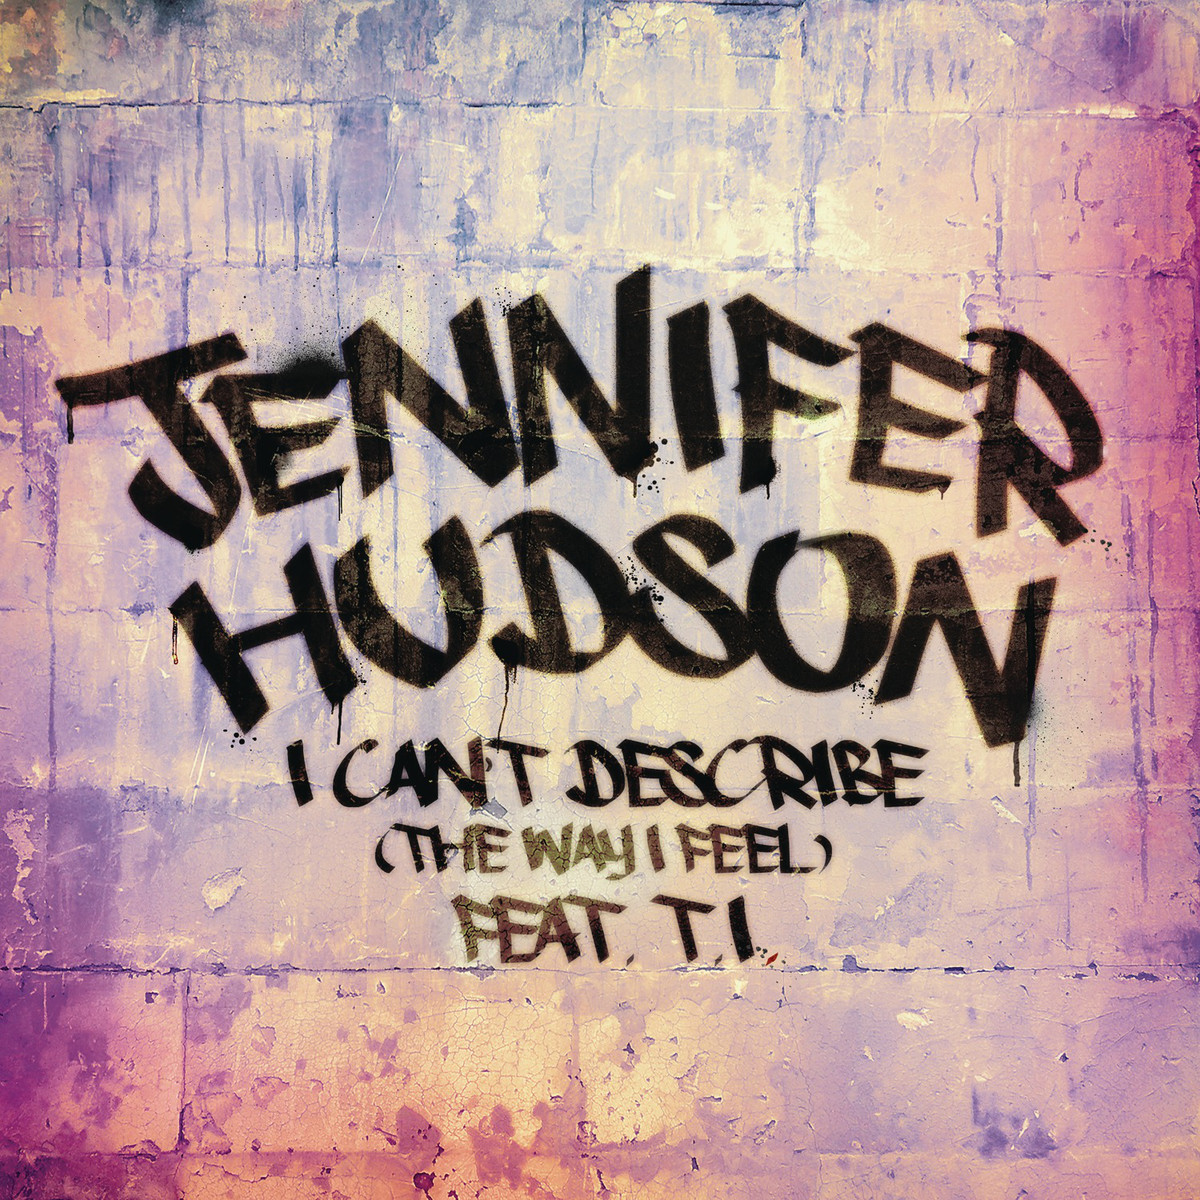 New Music: Jennifer Hudson "I Can't Describe (The Way I Feel)" Featuring T.I. (Produced by Pharrell)